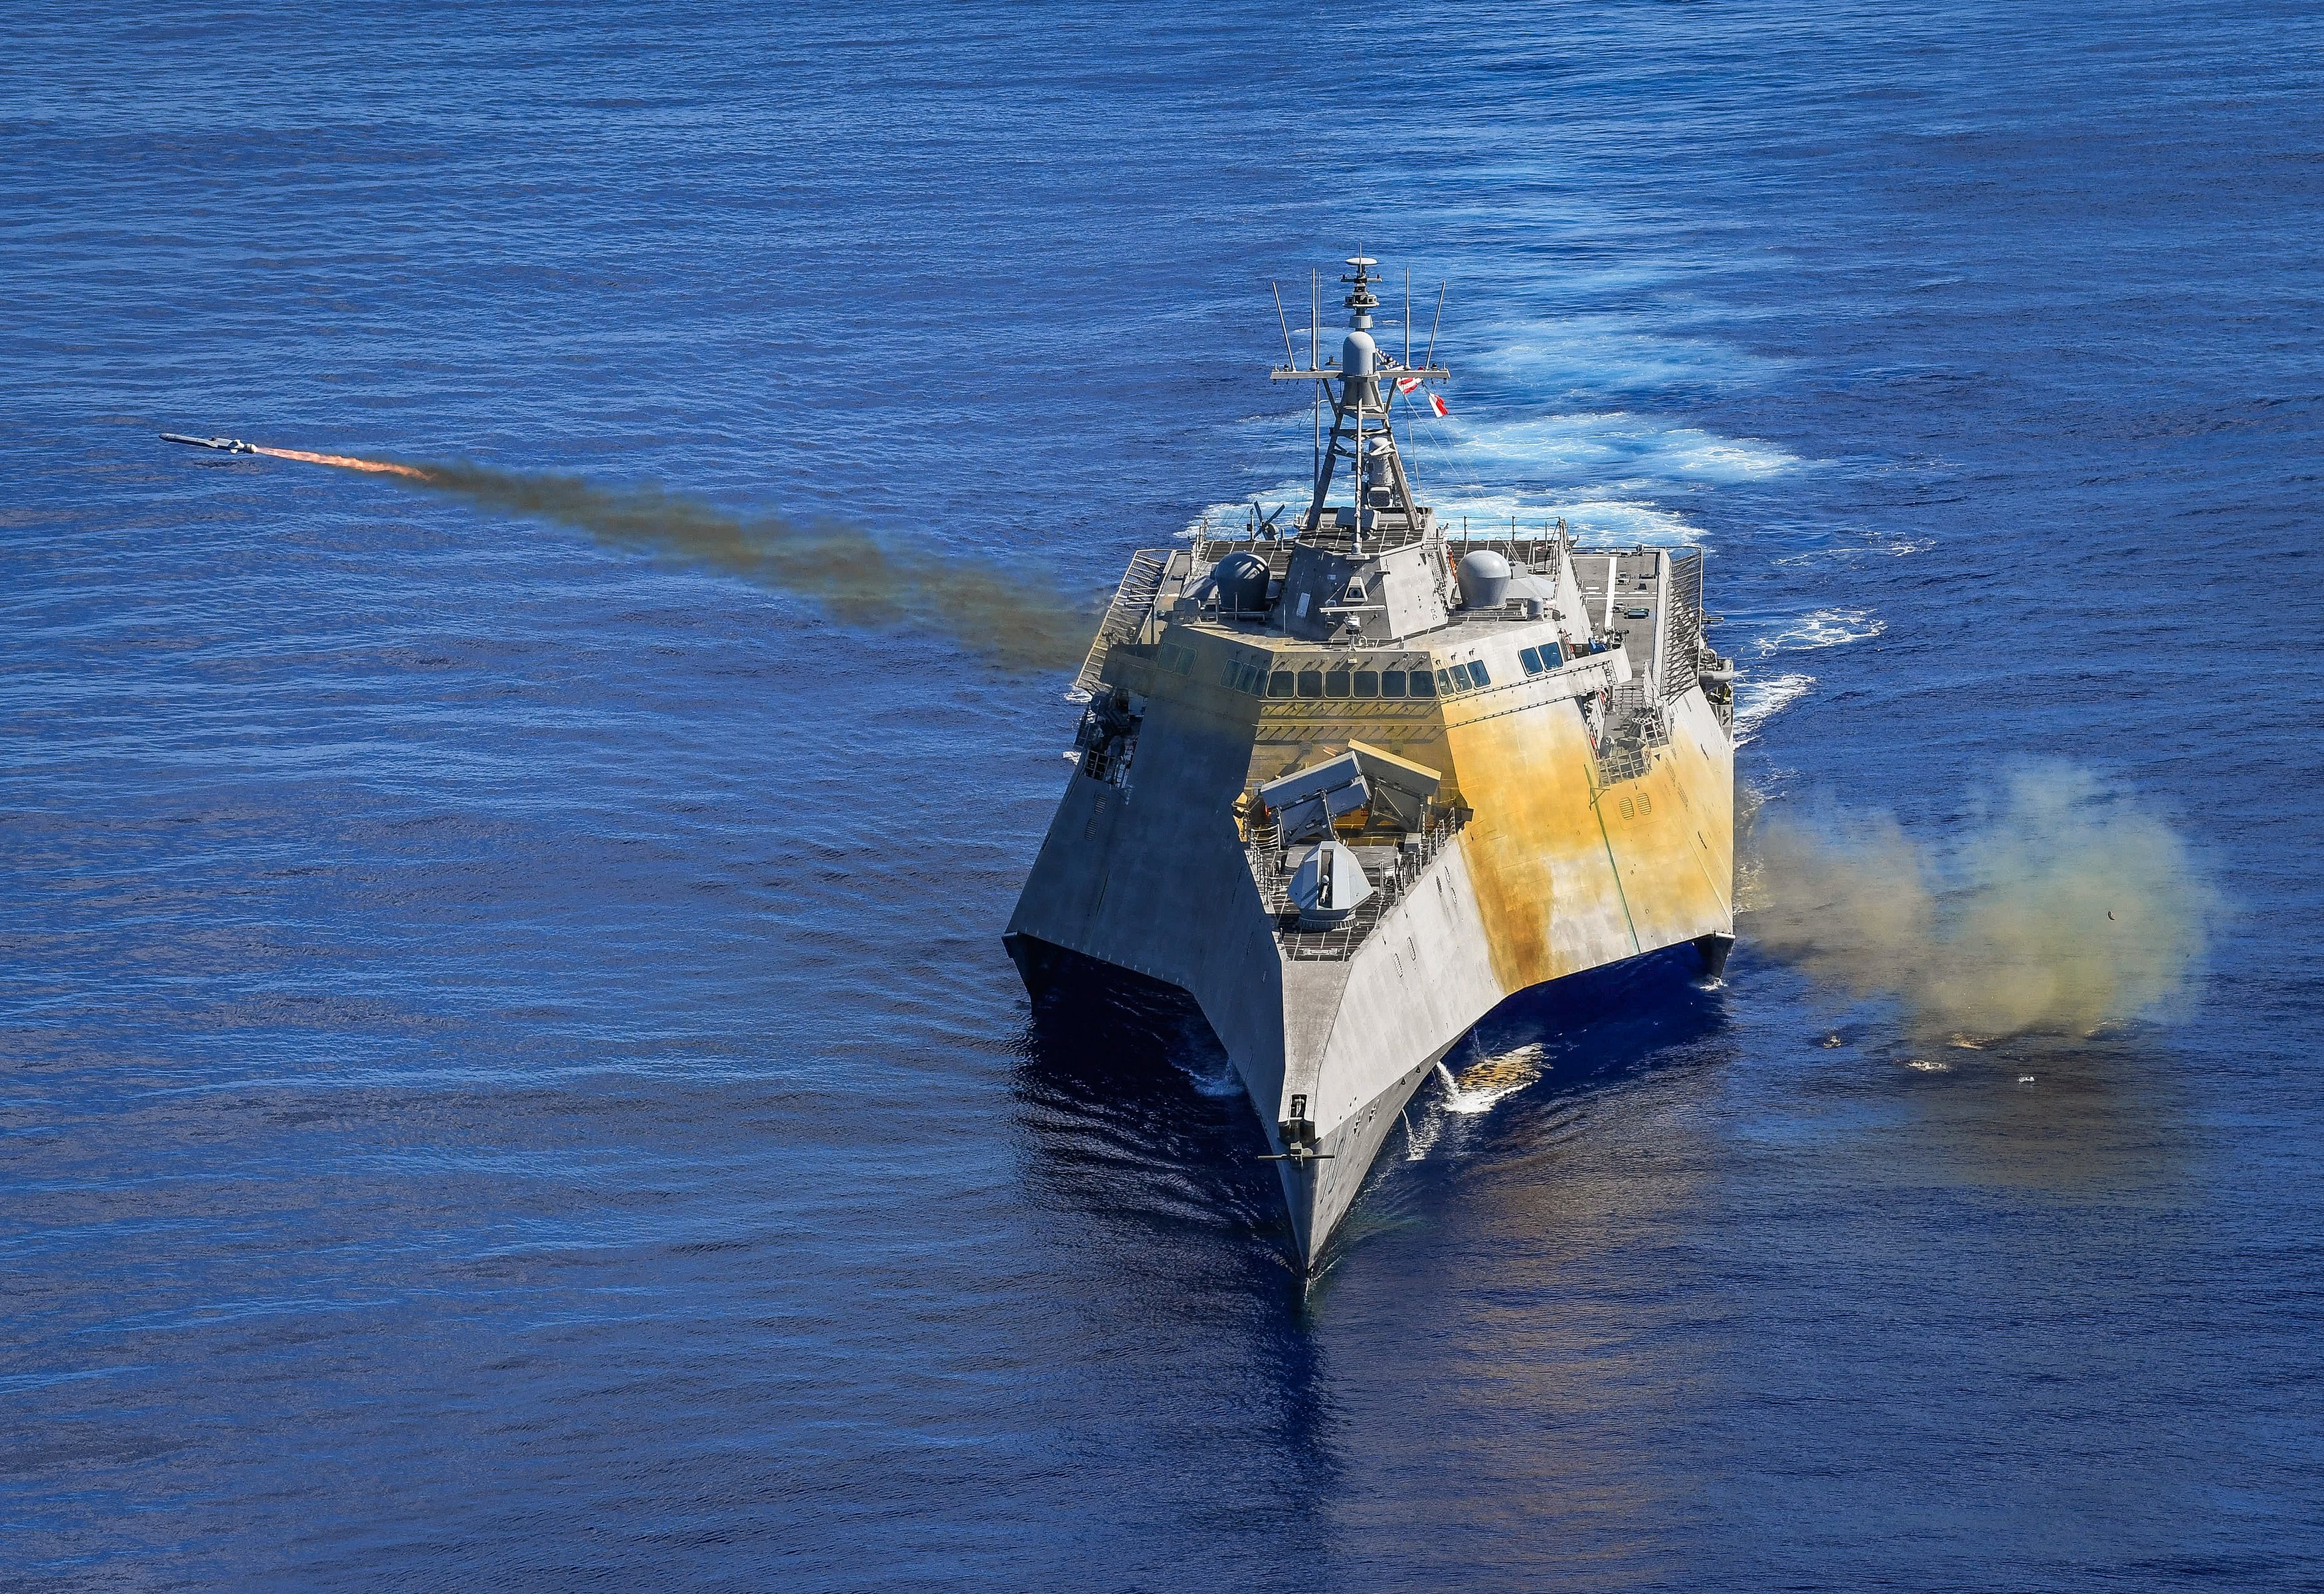 Chinese See U.S. Littoral Combat Ship as ‘Powerful Tool’ in Future